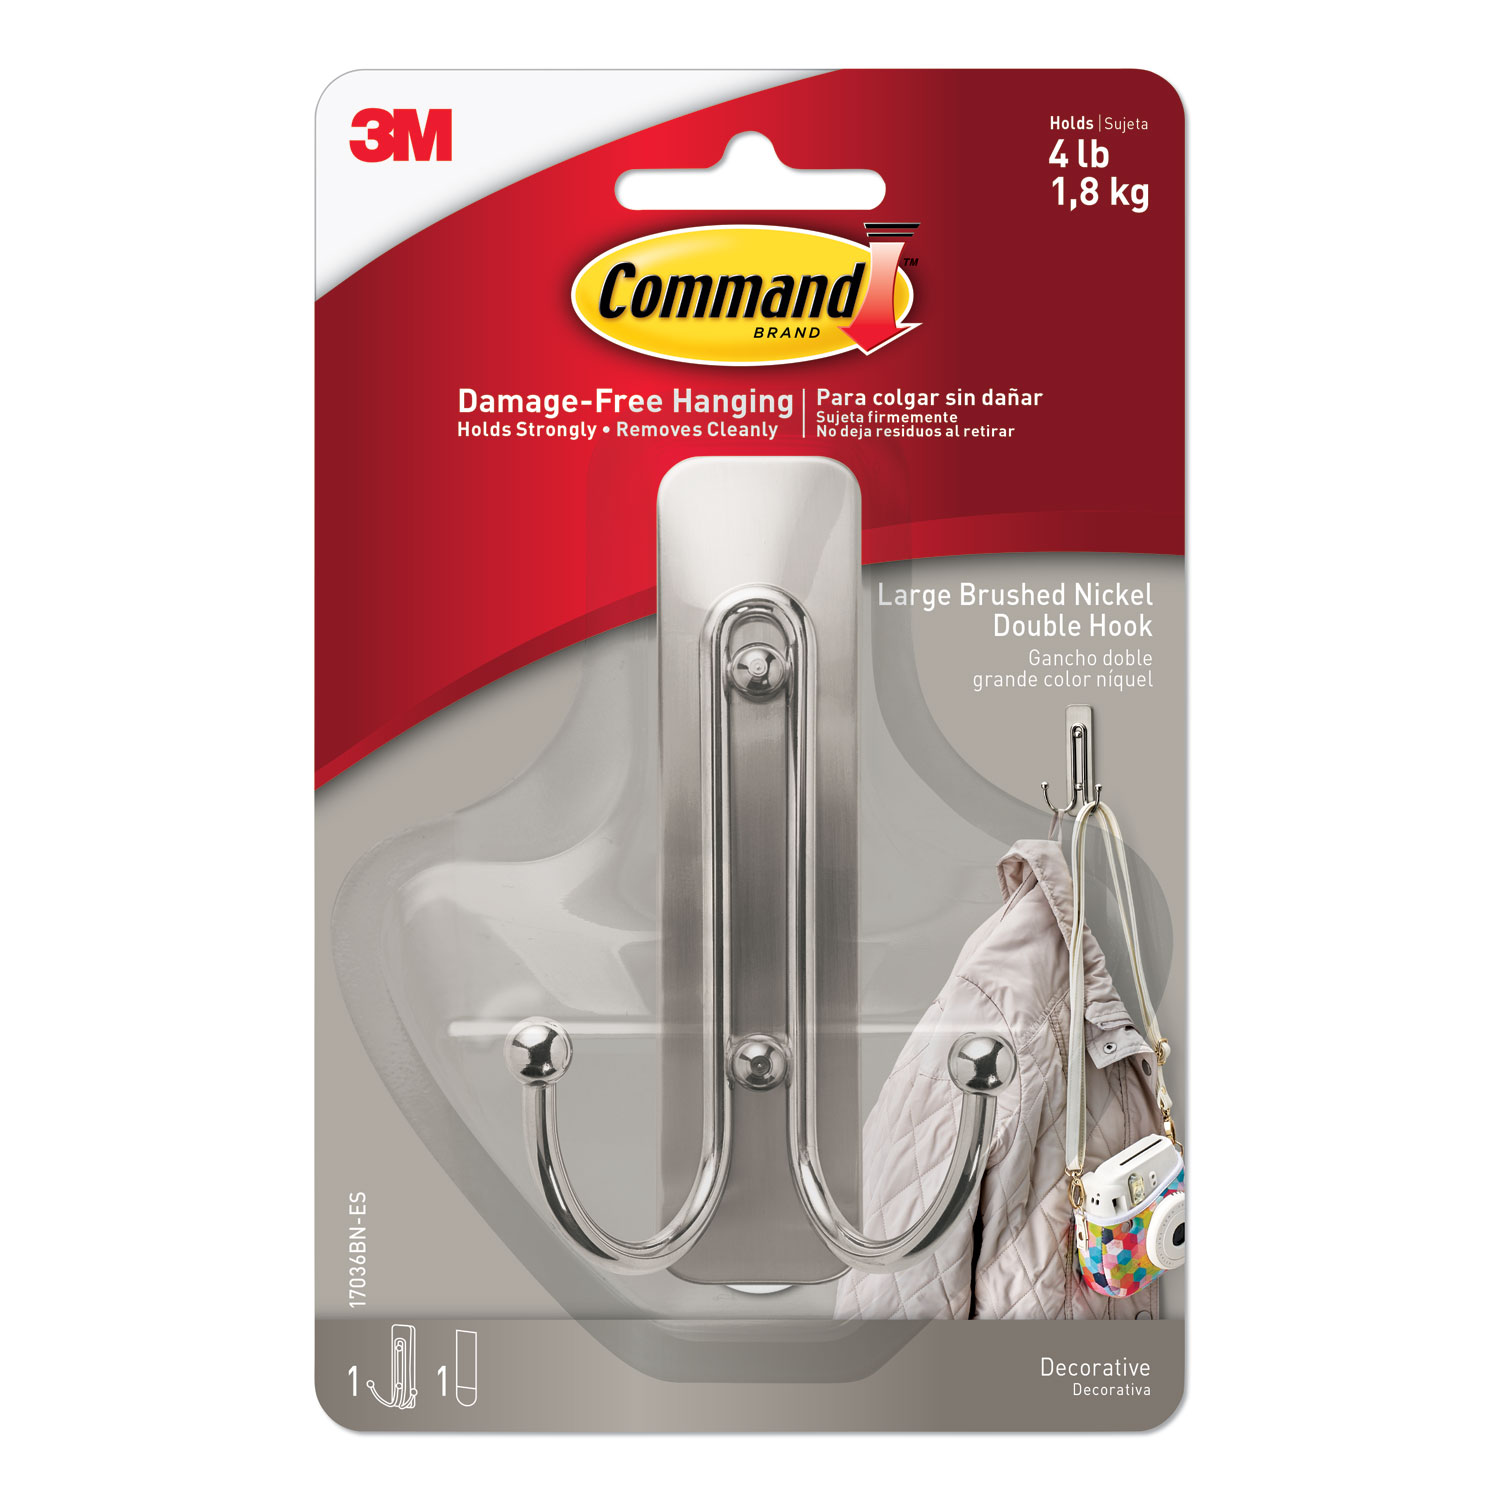  Command 17036BNES Adhesive Mount Metal Hook, Large, Double Hook, Brushed Nickel Finish, 1 Hook and 2 Strips/Pack (MMM17036BNES) 